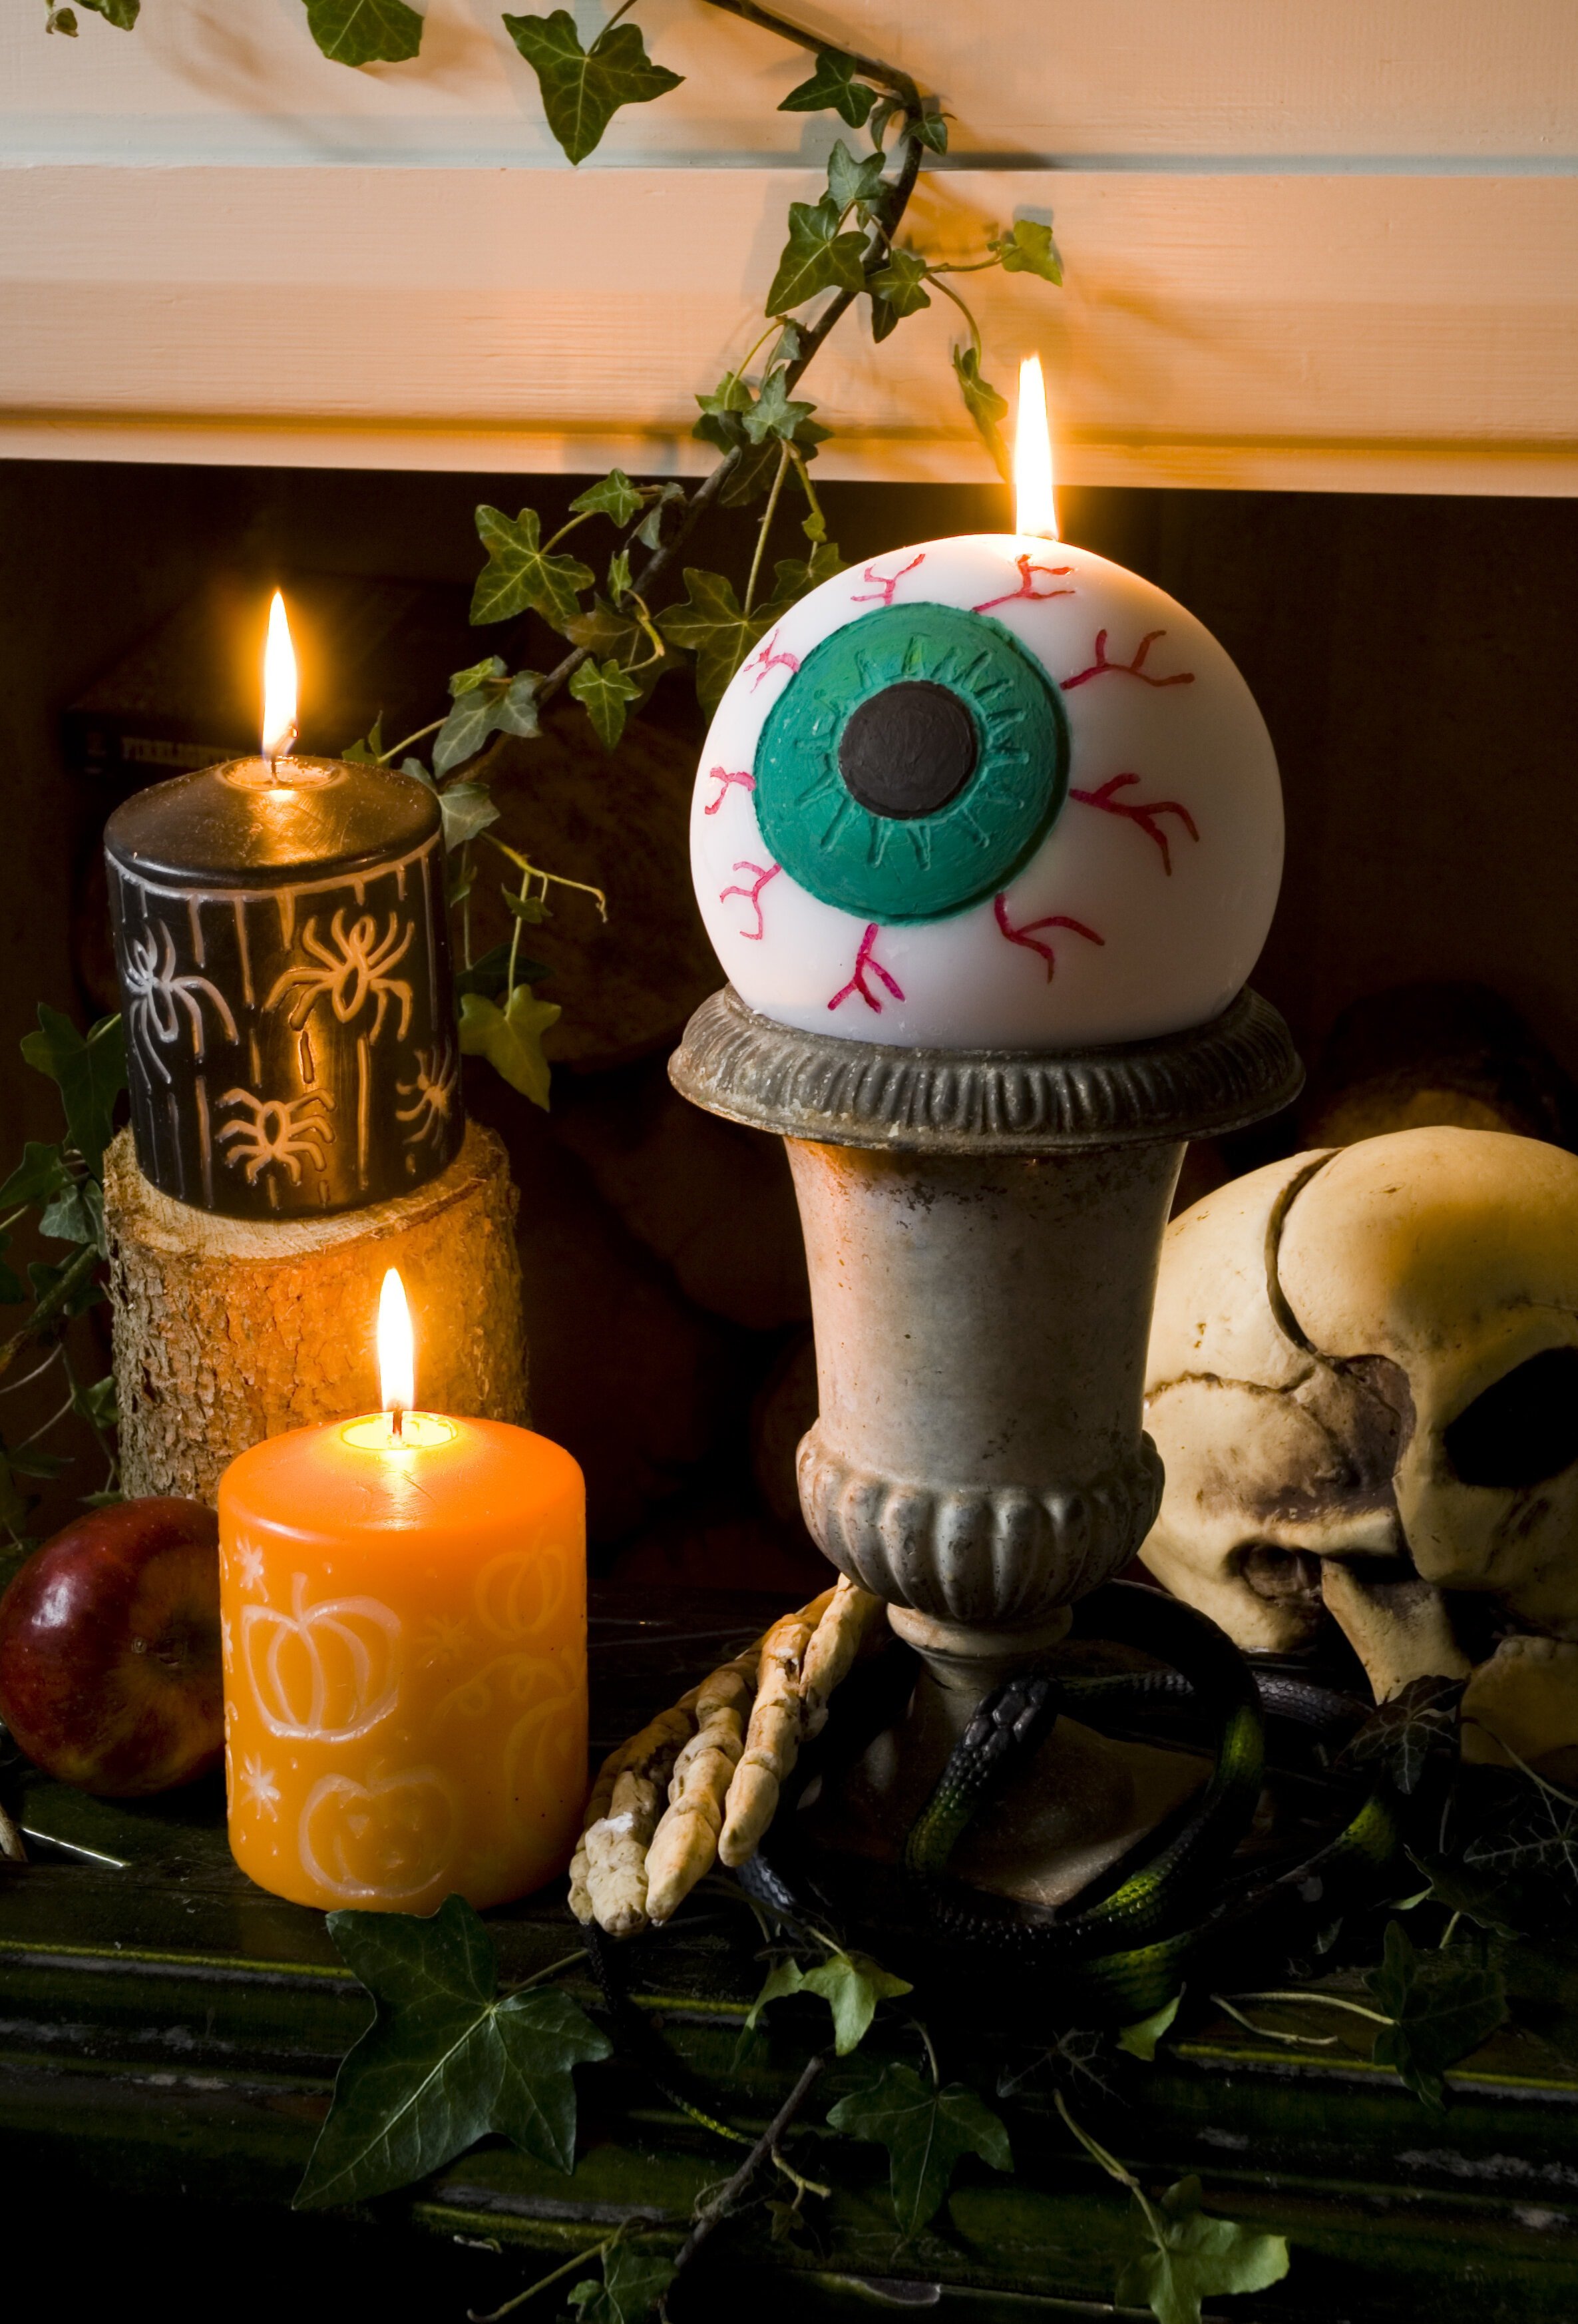 How to Make Halloween Candles